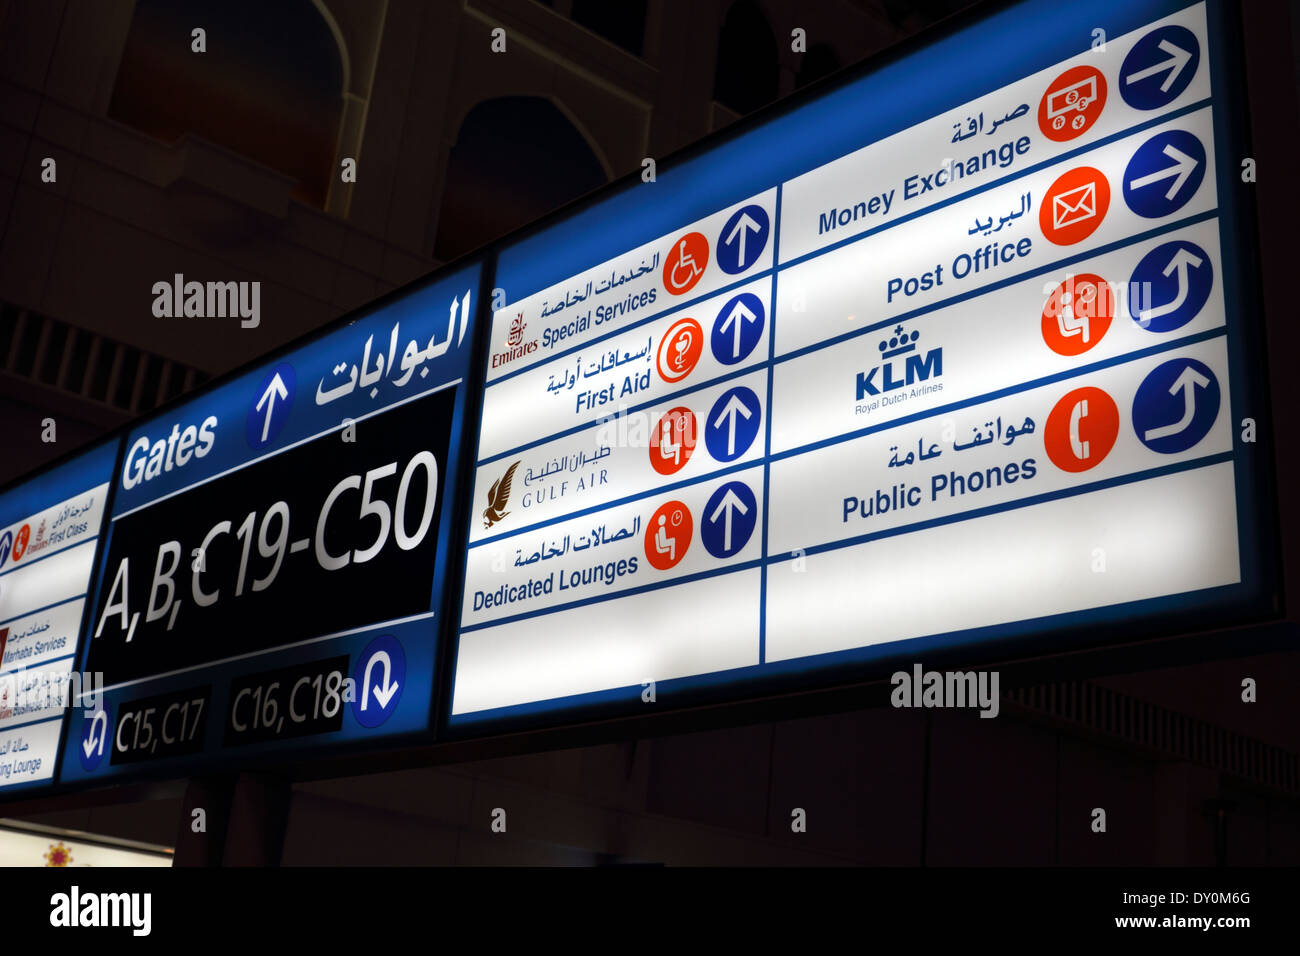 Information display in the departures lounge at Dubai International Airport, United Arab Emirates Stock Photo